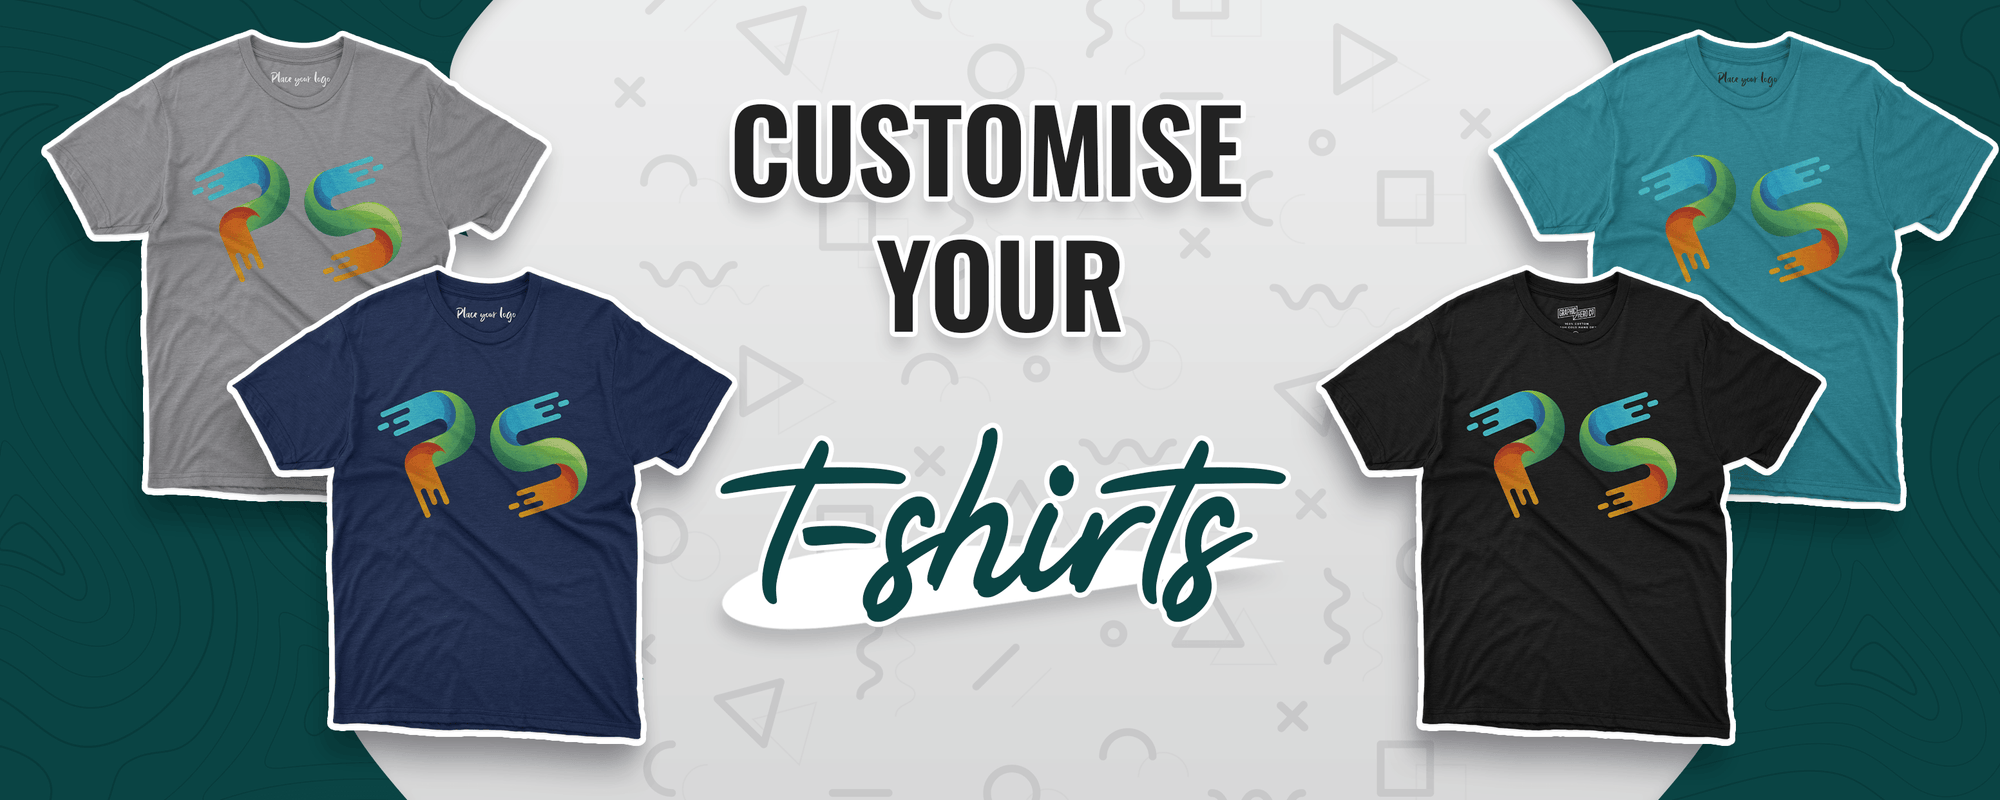 Customised T-Shirts for Men